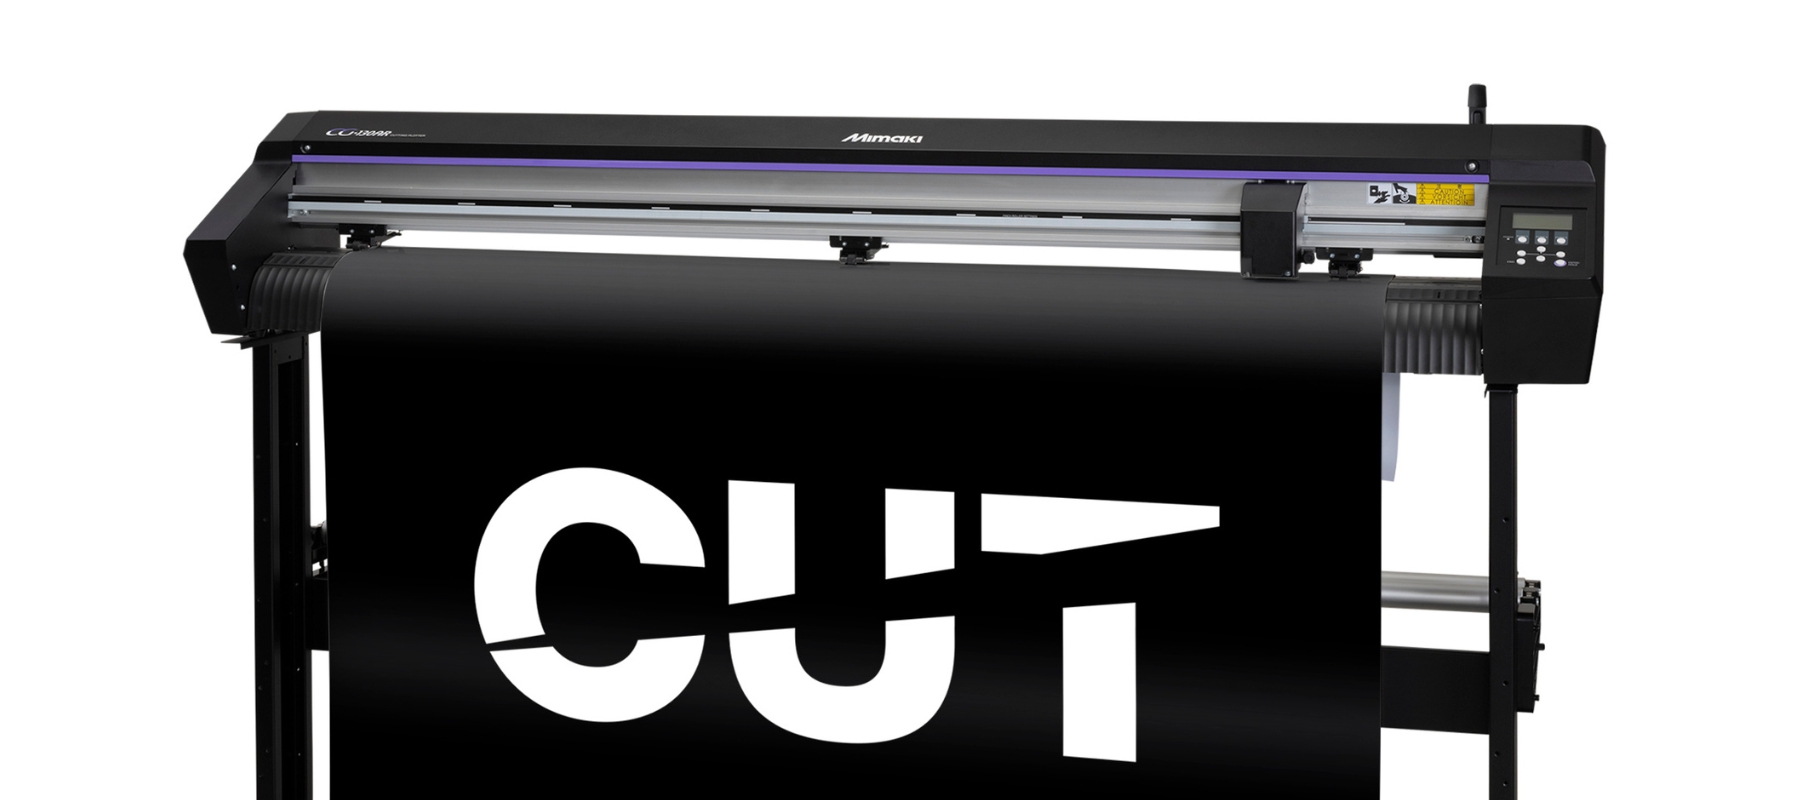 A Mimaki vinyl cutter shown with black vinyl with the word cut in relief